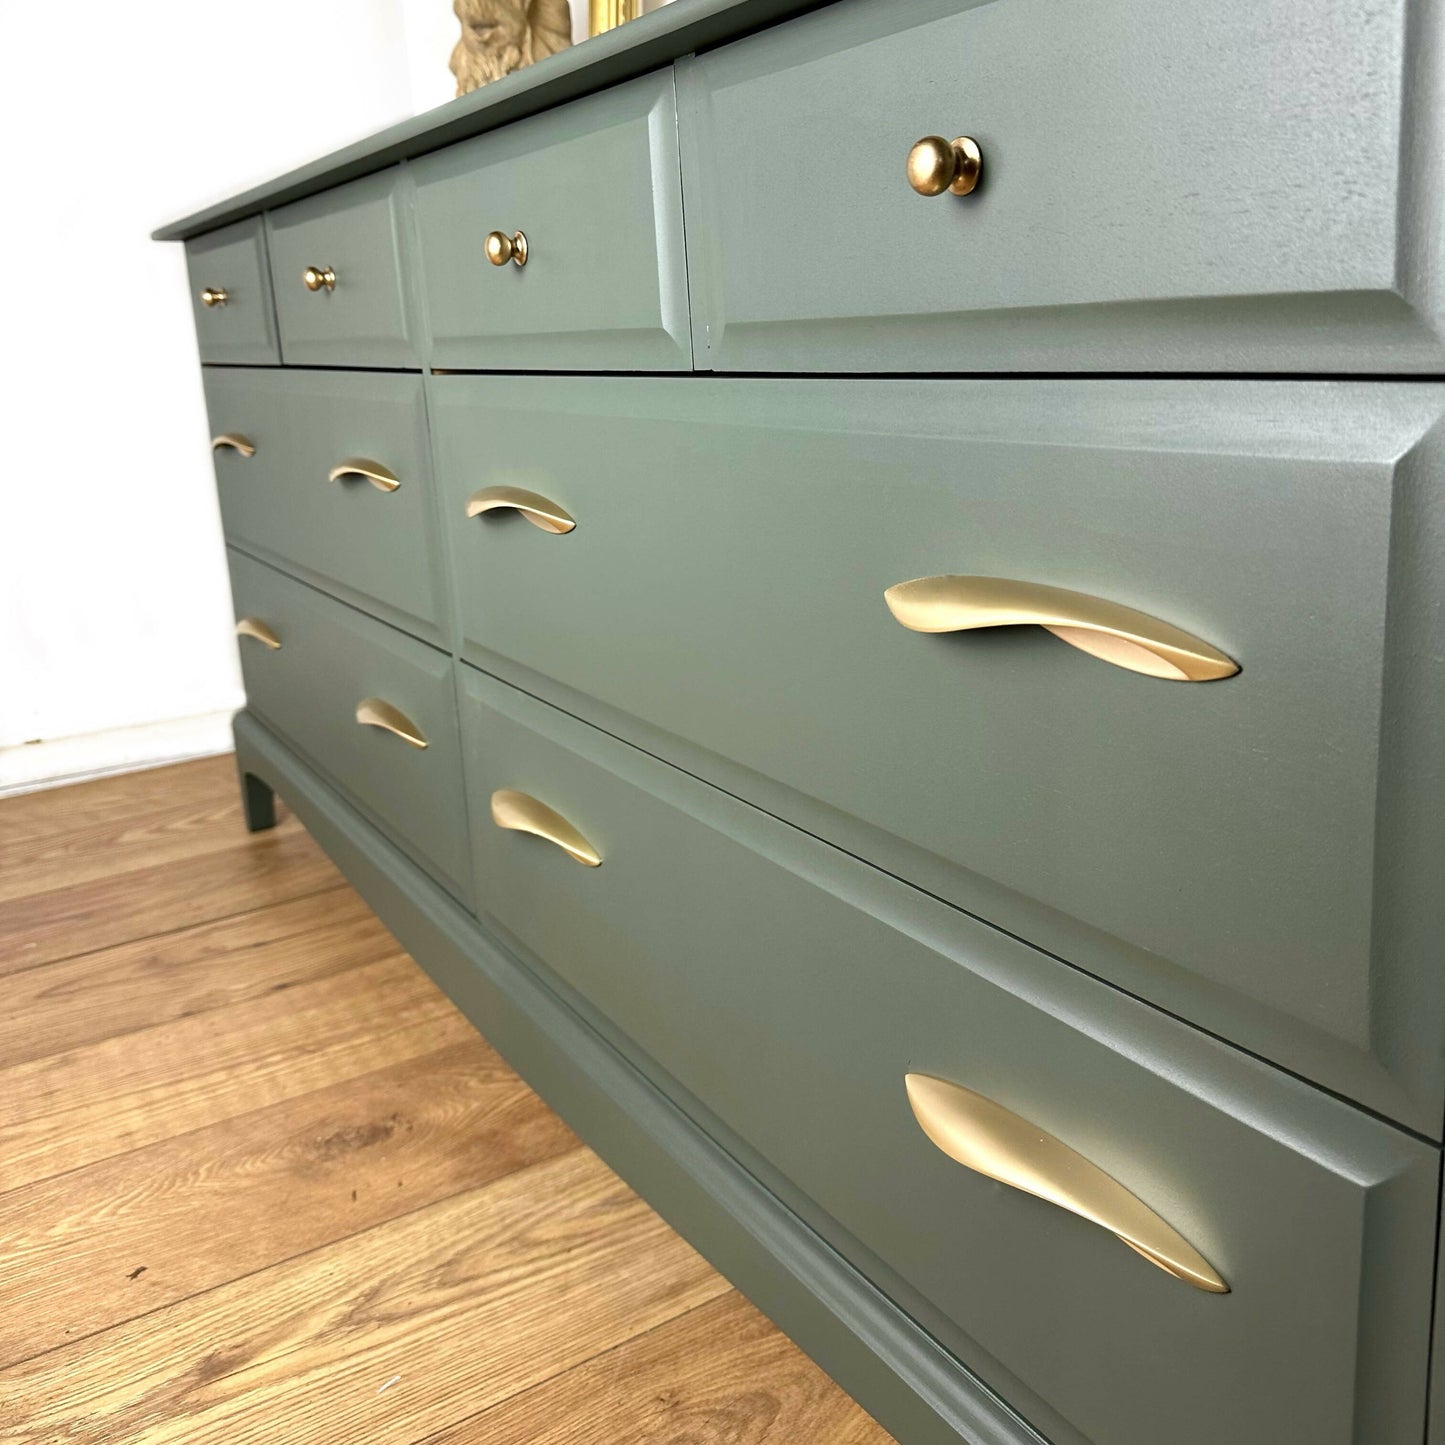 SOLD commissions available Refurbished Vintage Stag Minstrel Captains chest, large chest of drawers, mid century modern, olive green and gold, hand painted